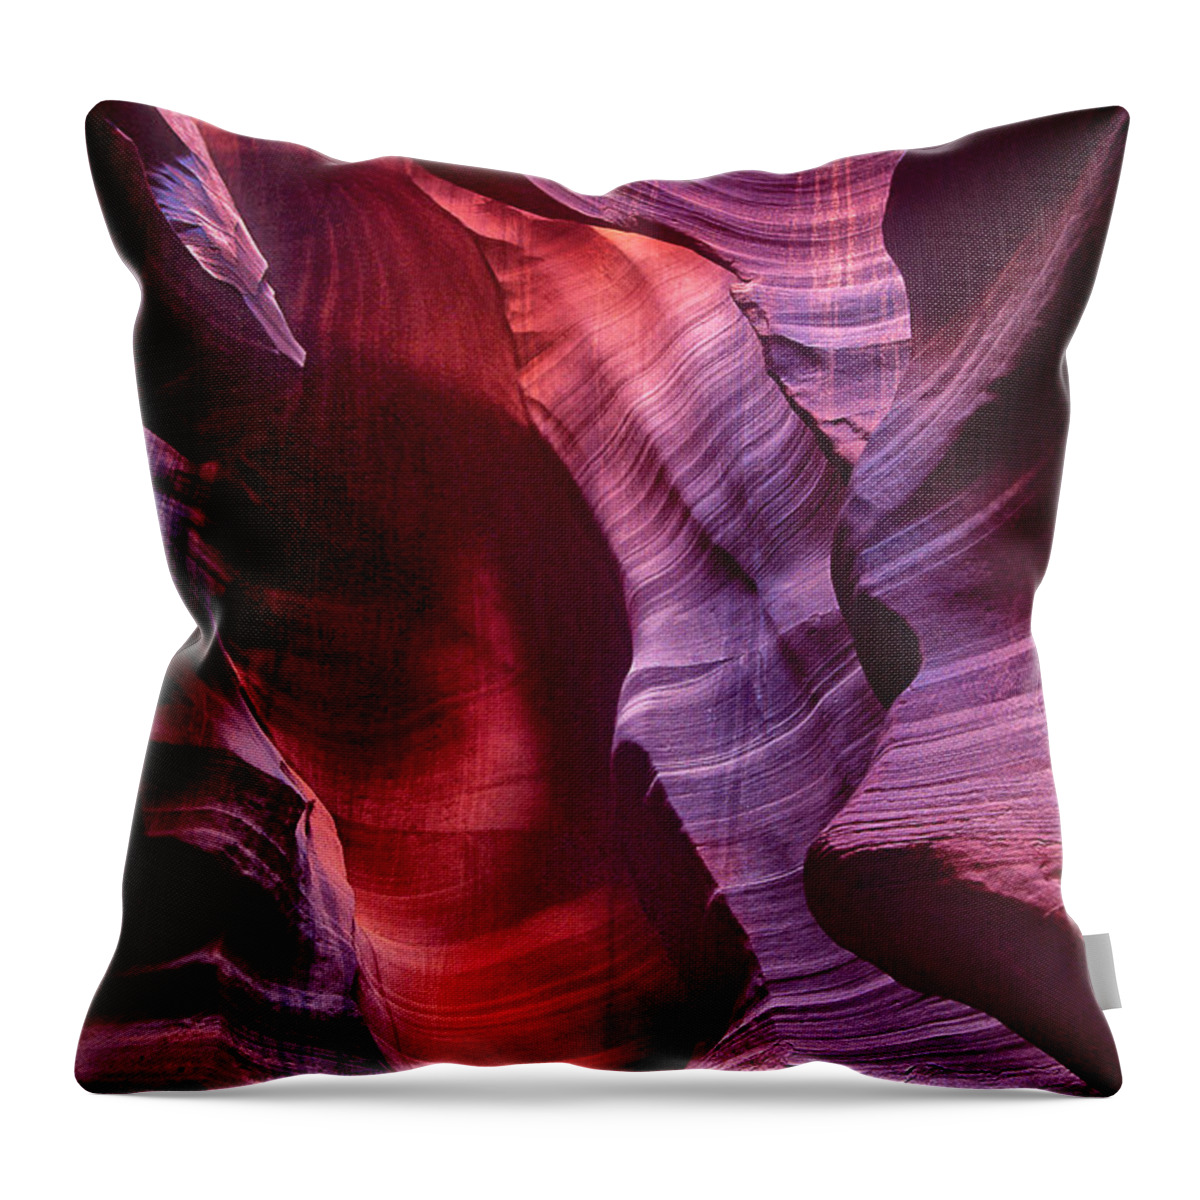 Dave Welling Throw Pillow featuring the photograph Sanstone Formation Corkscrew Or Upper Antelope Slot Canyon by Dave Welling